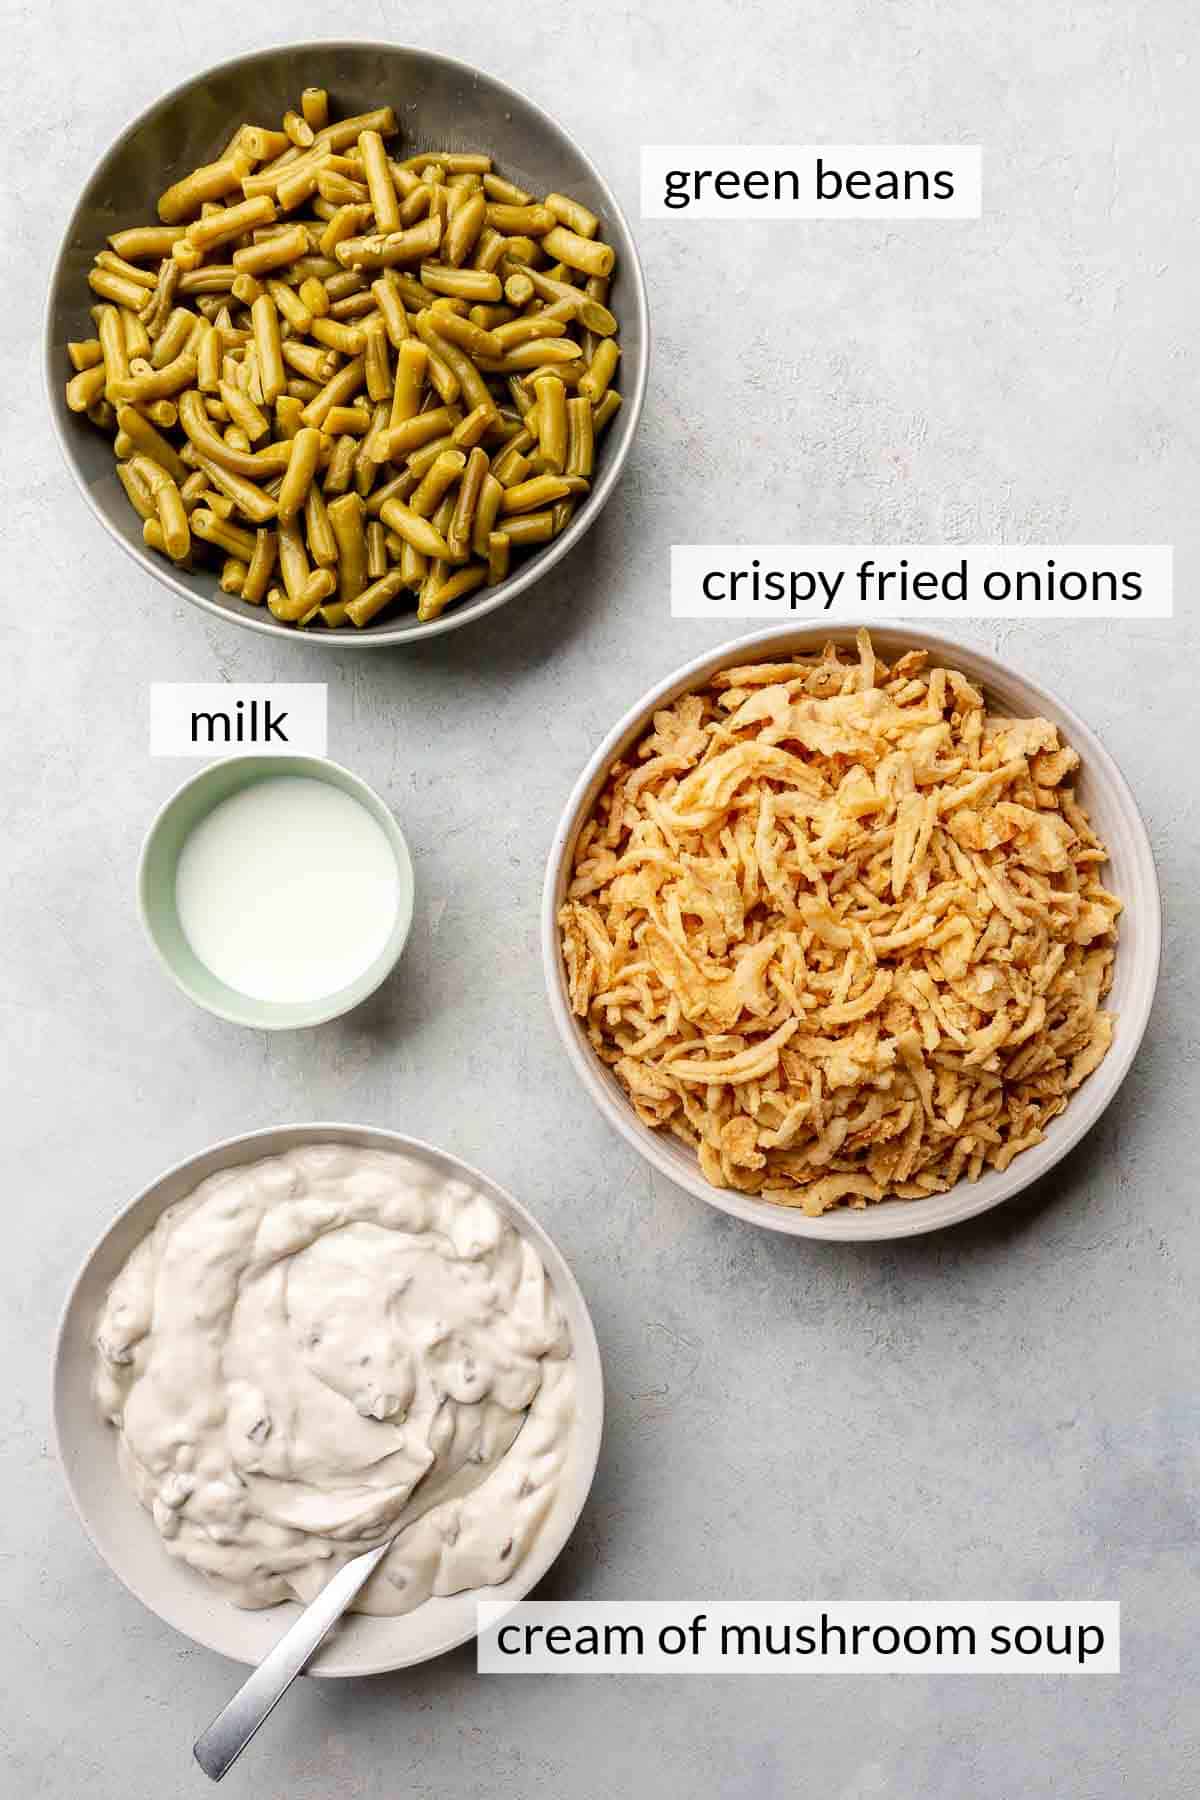 Green beans, cream of mushroom soup, milk and crispy fried onions divided into small bowls.